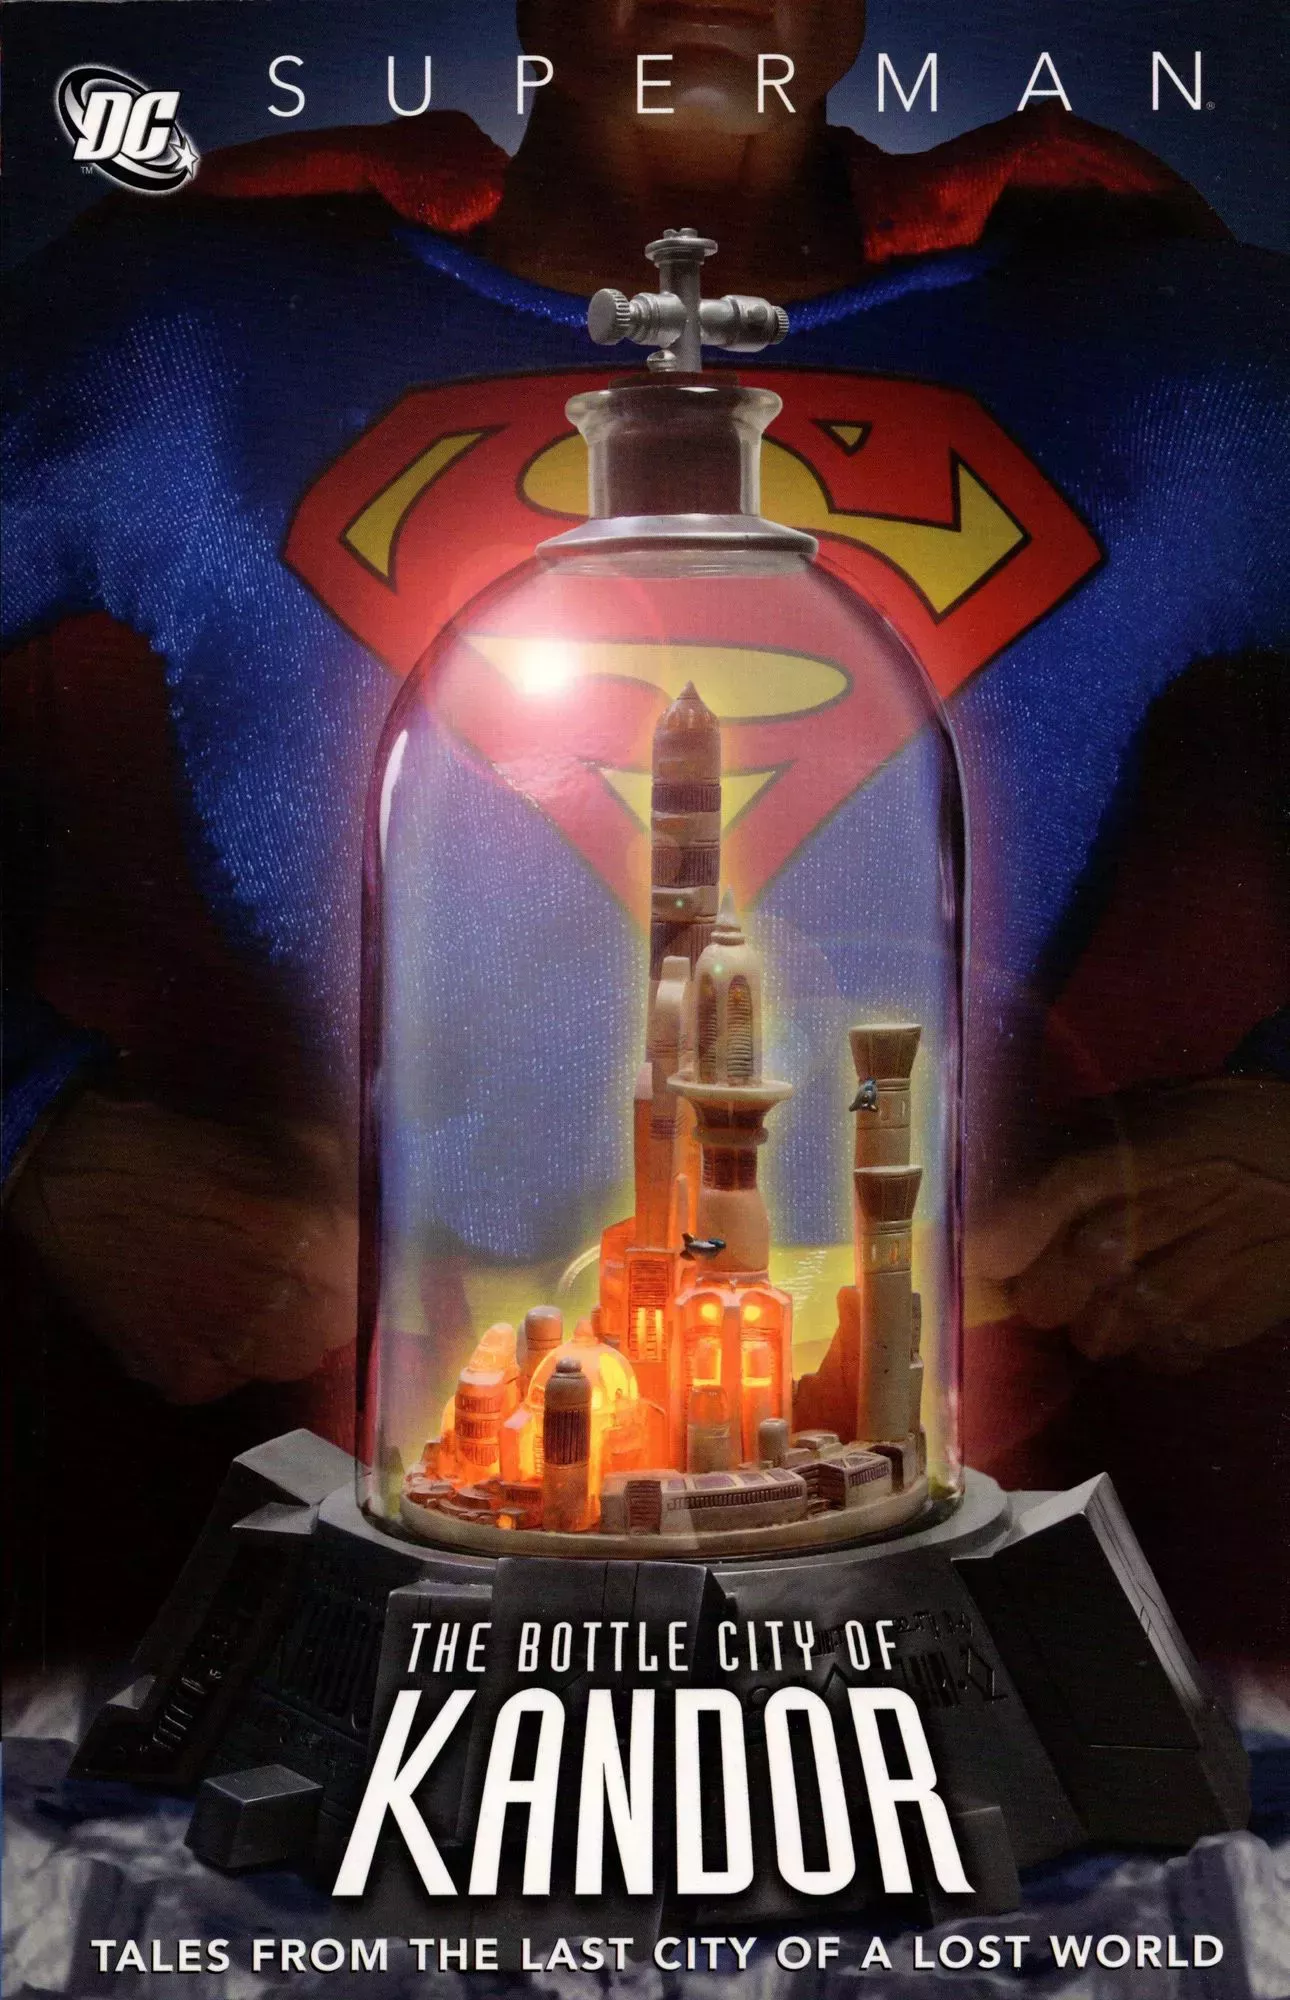 Superman stands behind the miniature bottle city of kandor